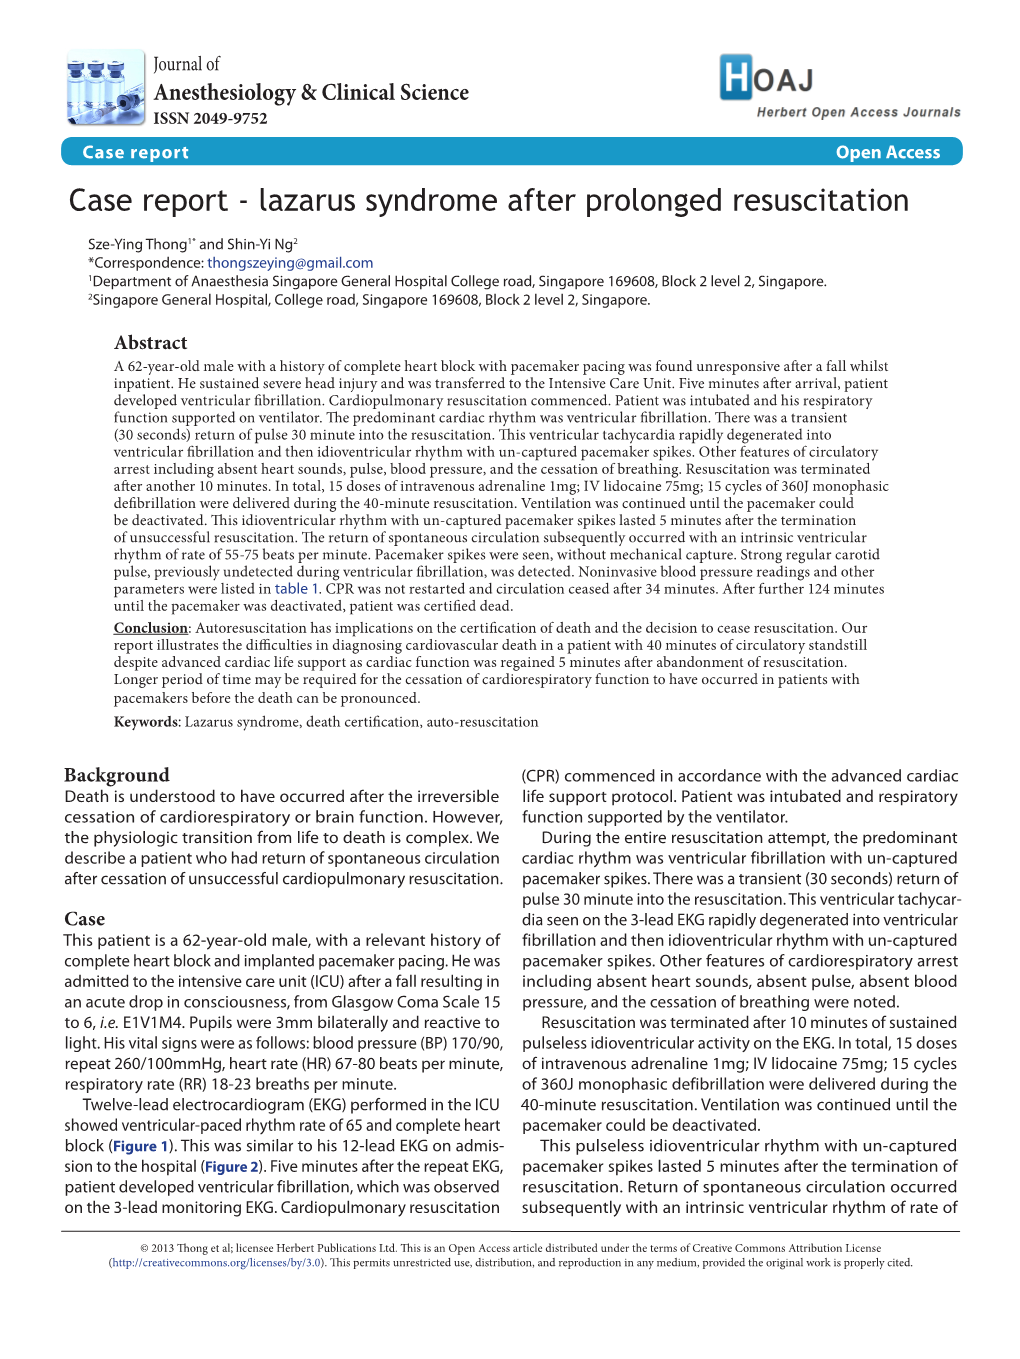 Case Report Open Access Case Report - Lazarus Syndrome After Prolonged Resuscitation